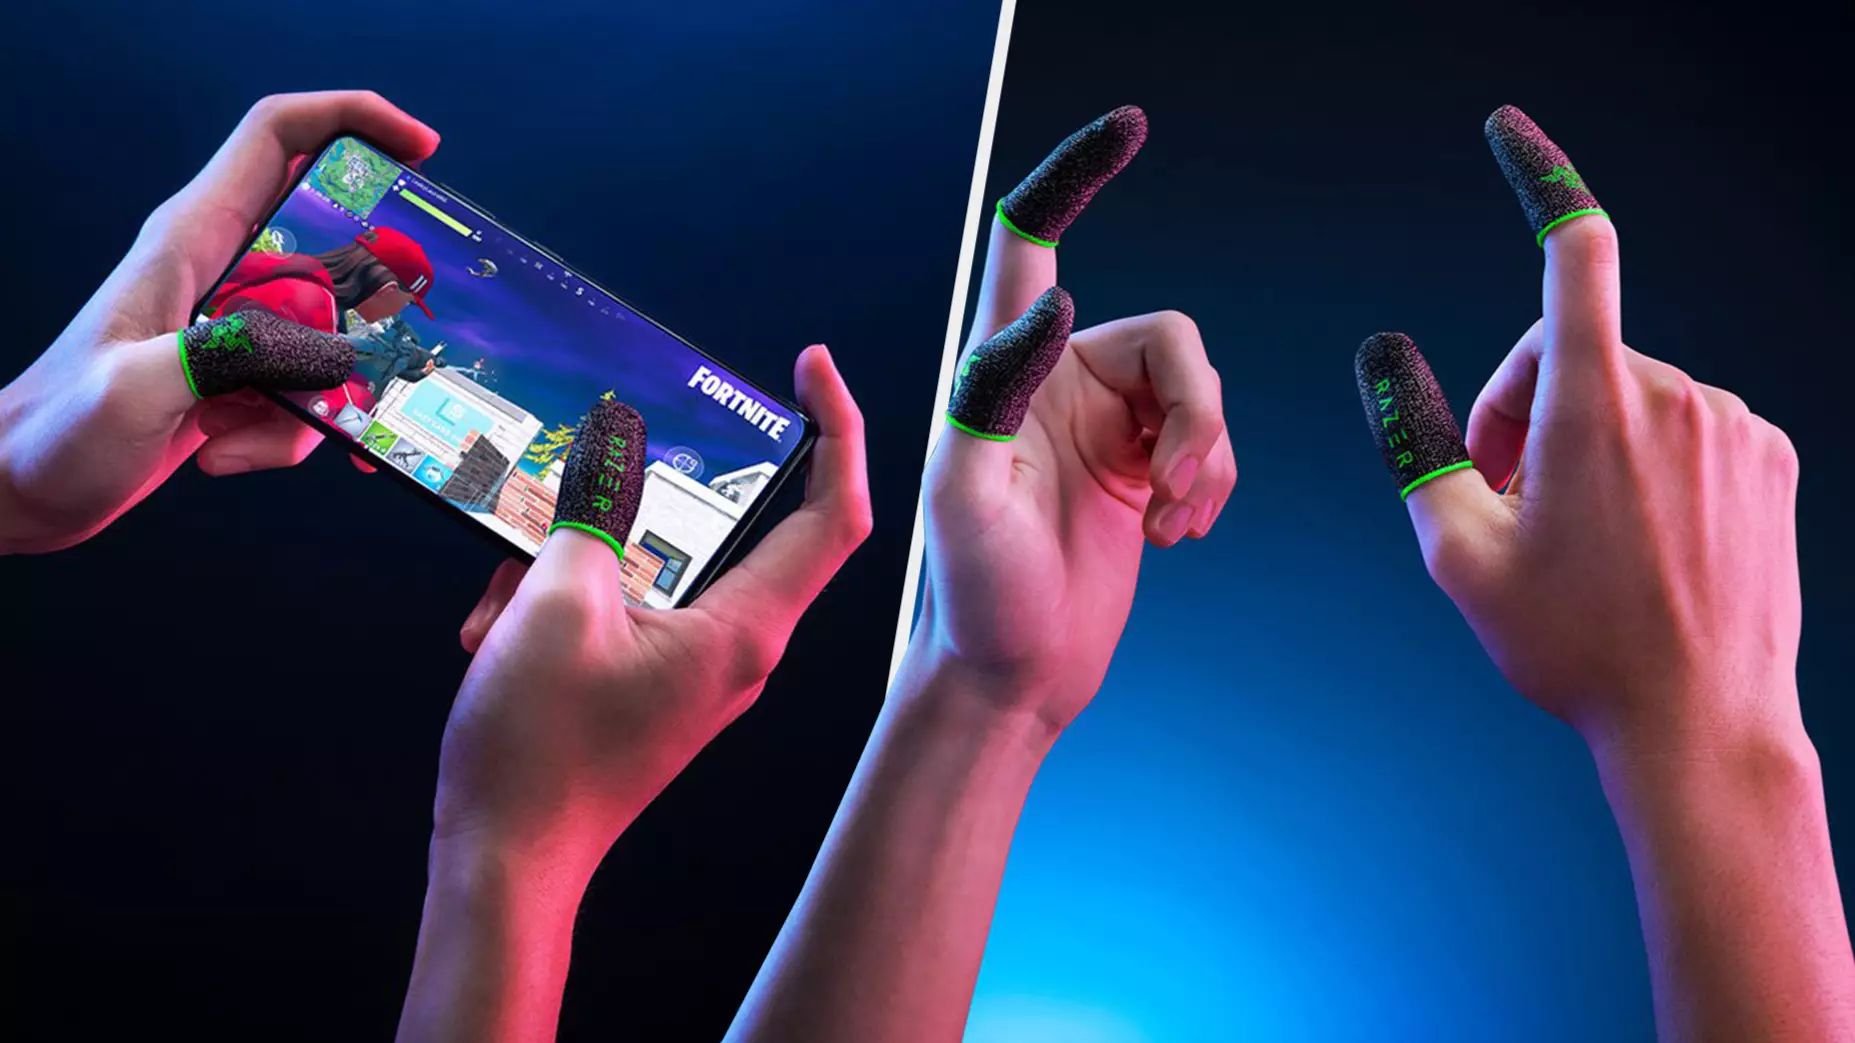 Razer Announces New "Finger Sleeves" To Protect Your Digits While Gaming